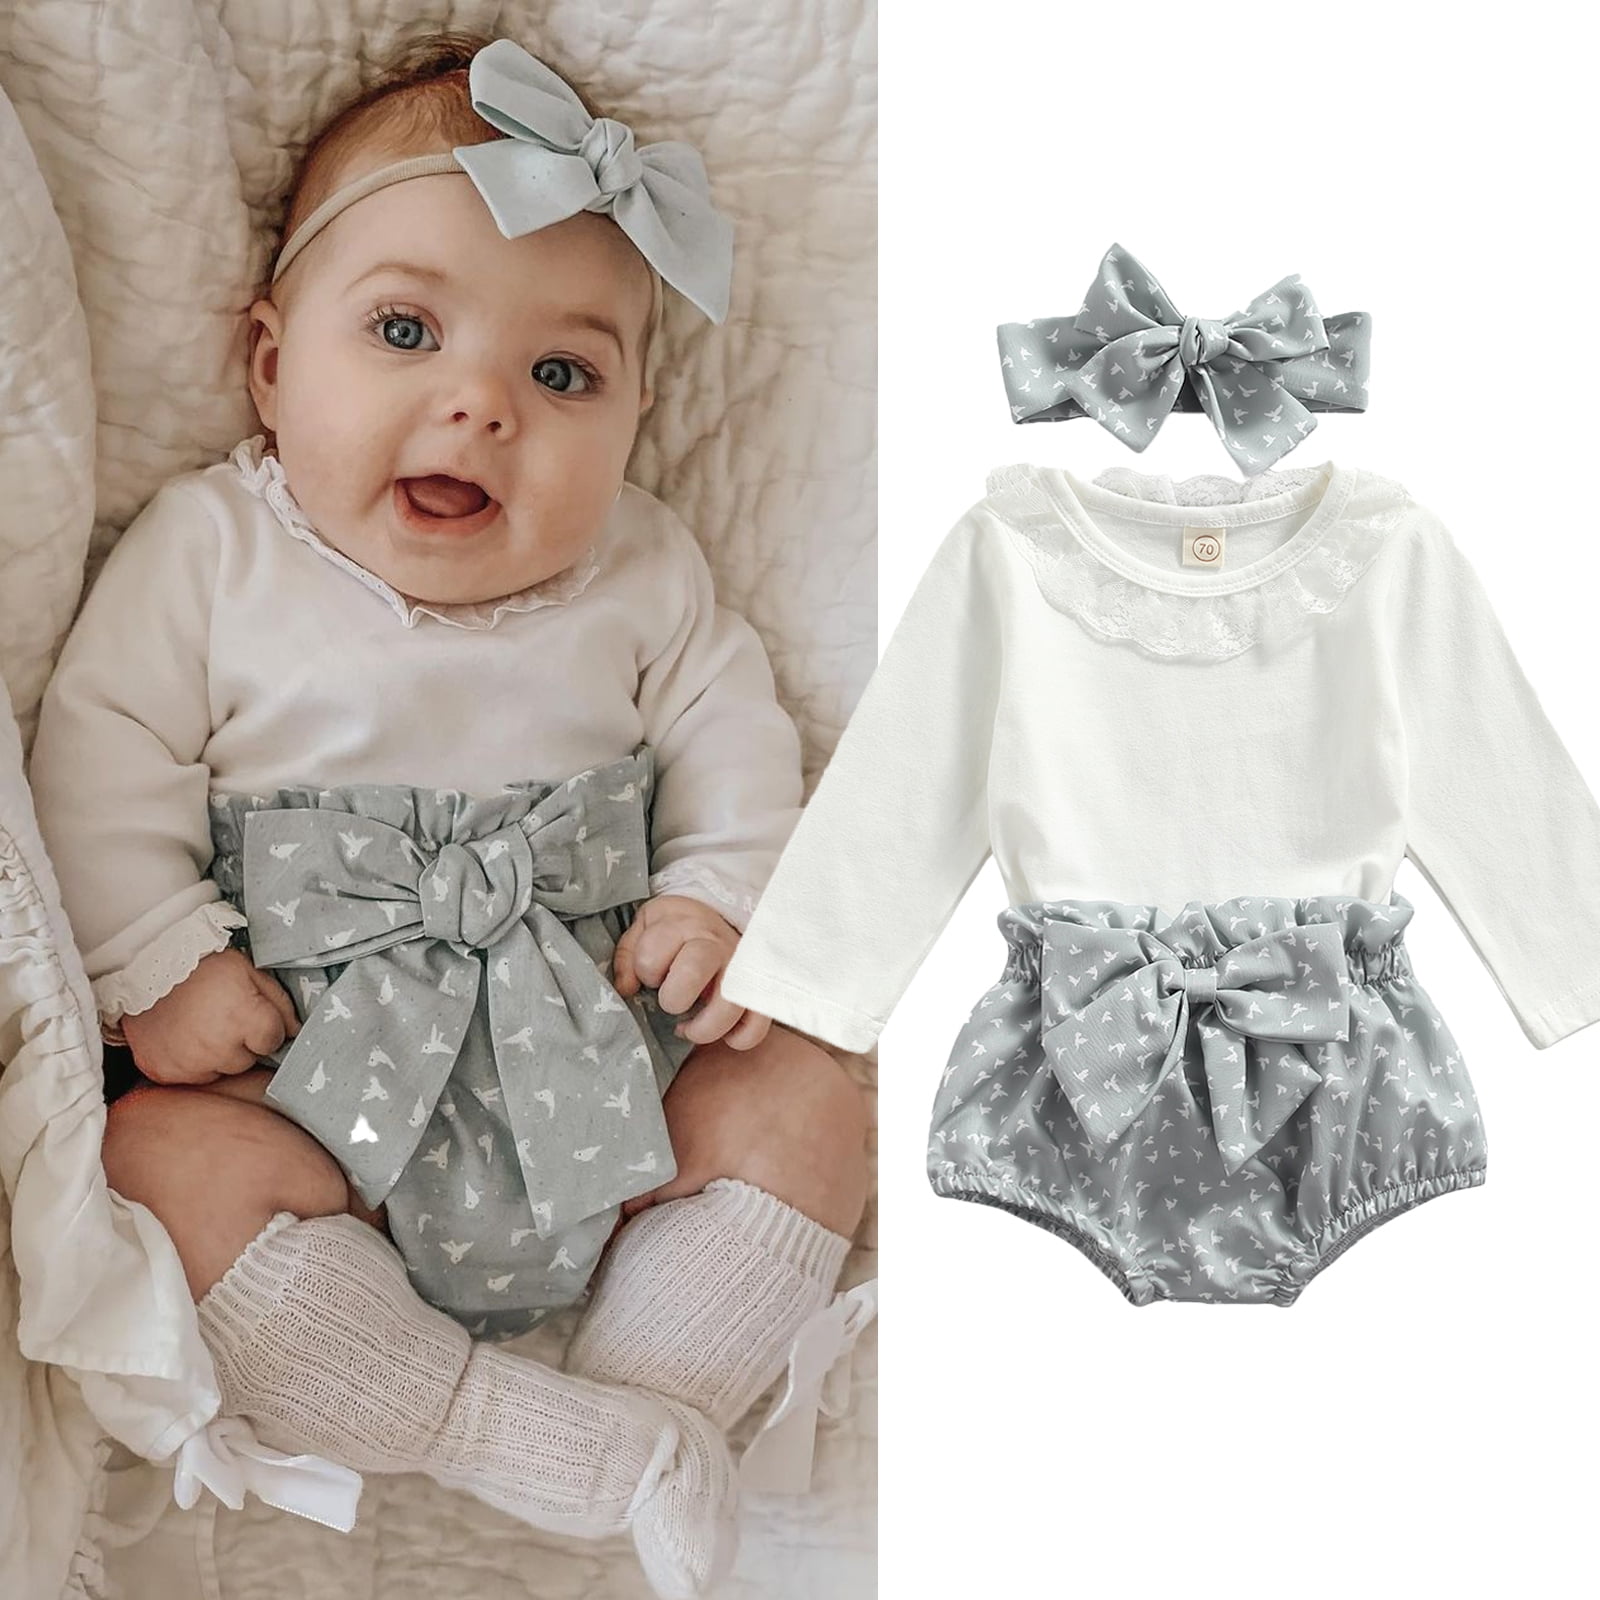 US Cute Infant Baby Girl Floral Romper Bow Headband Princess Sunsuit Outfits New 